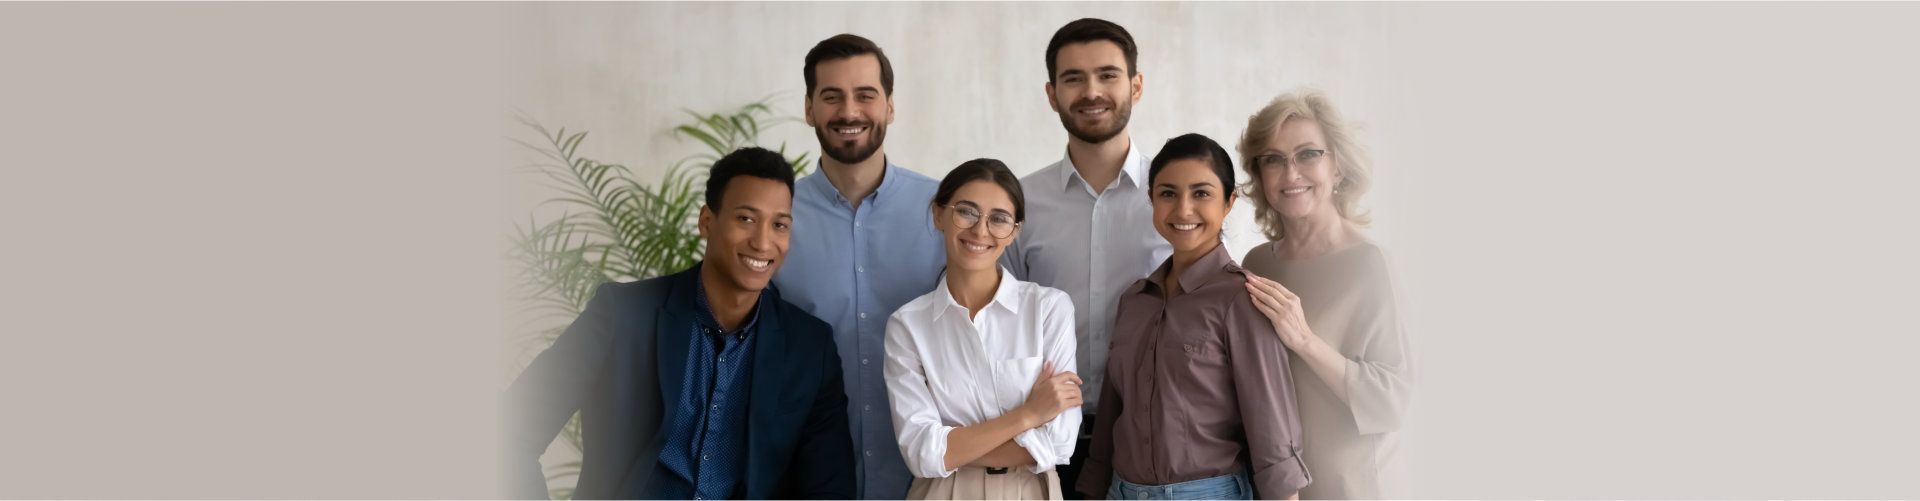 Diverse happy business people successful employees team posing in office